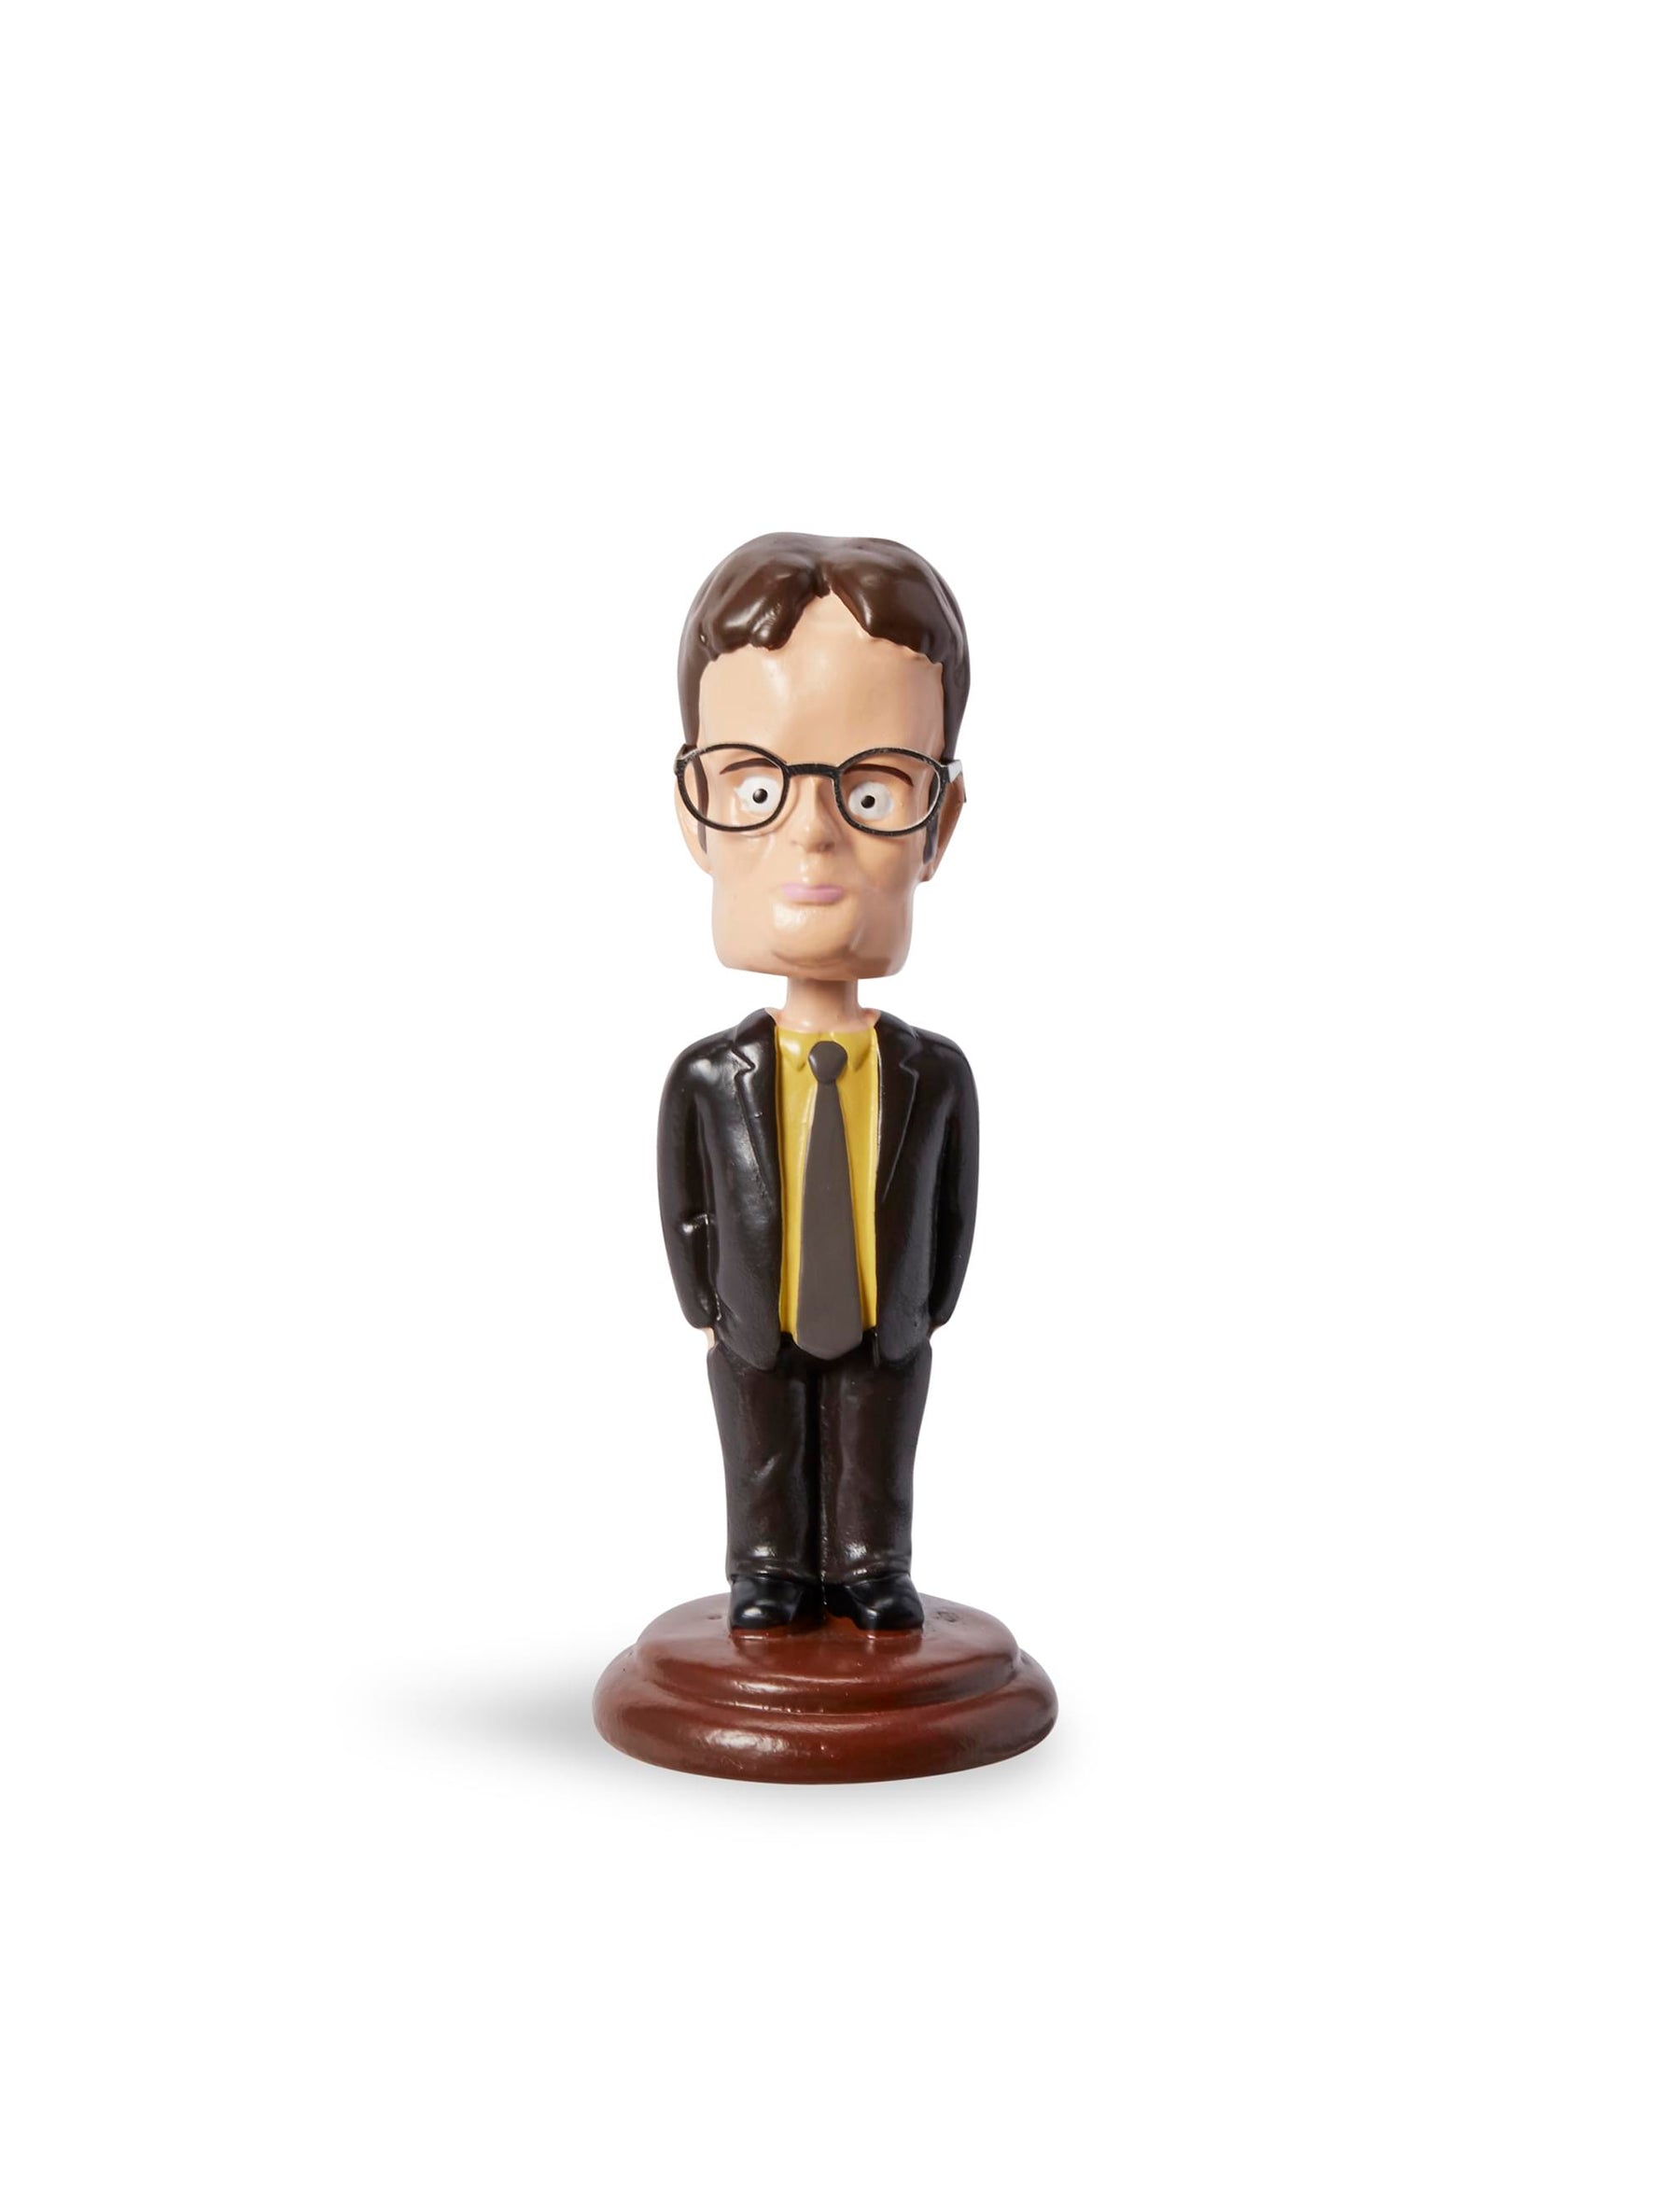 The Office LookSee Collector's Mystery Gift Box - Bobblehead, Mug, Lanyard, And More